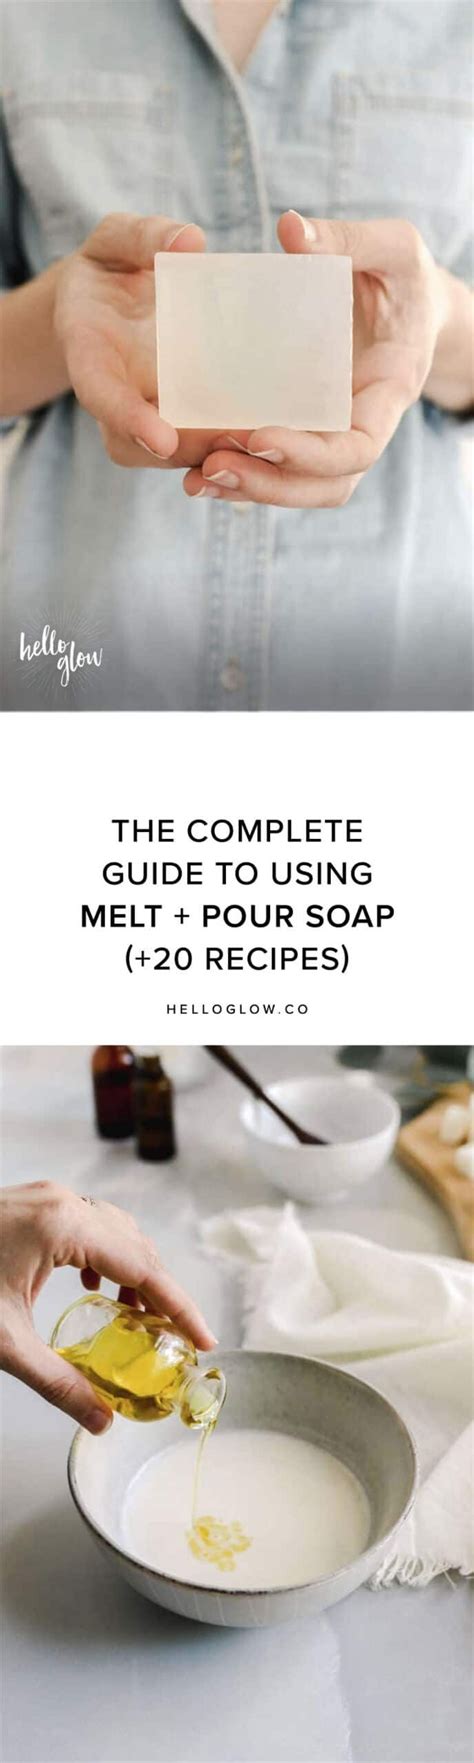 The Complete Guide To Making Melt Pour Soap With Ingredients And